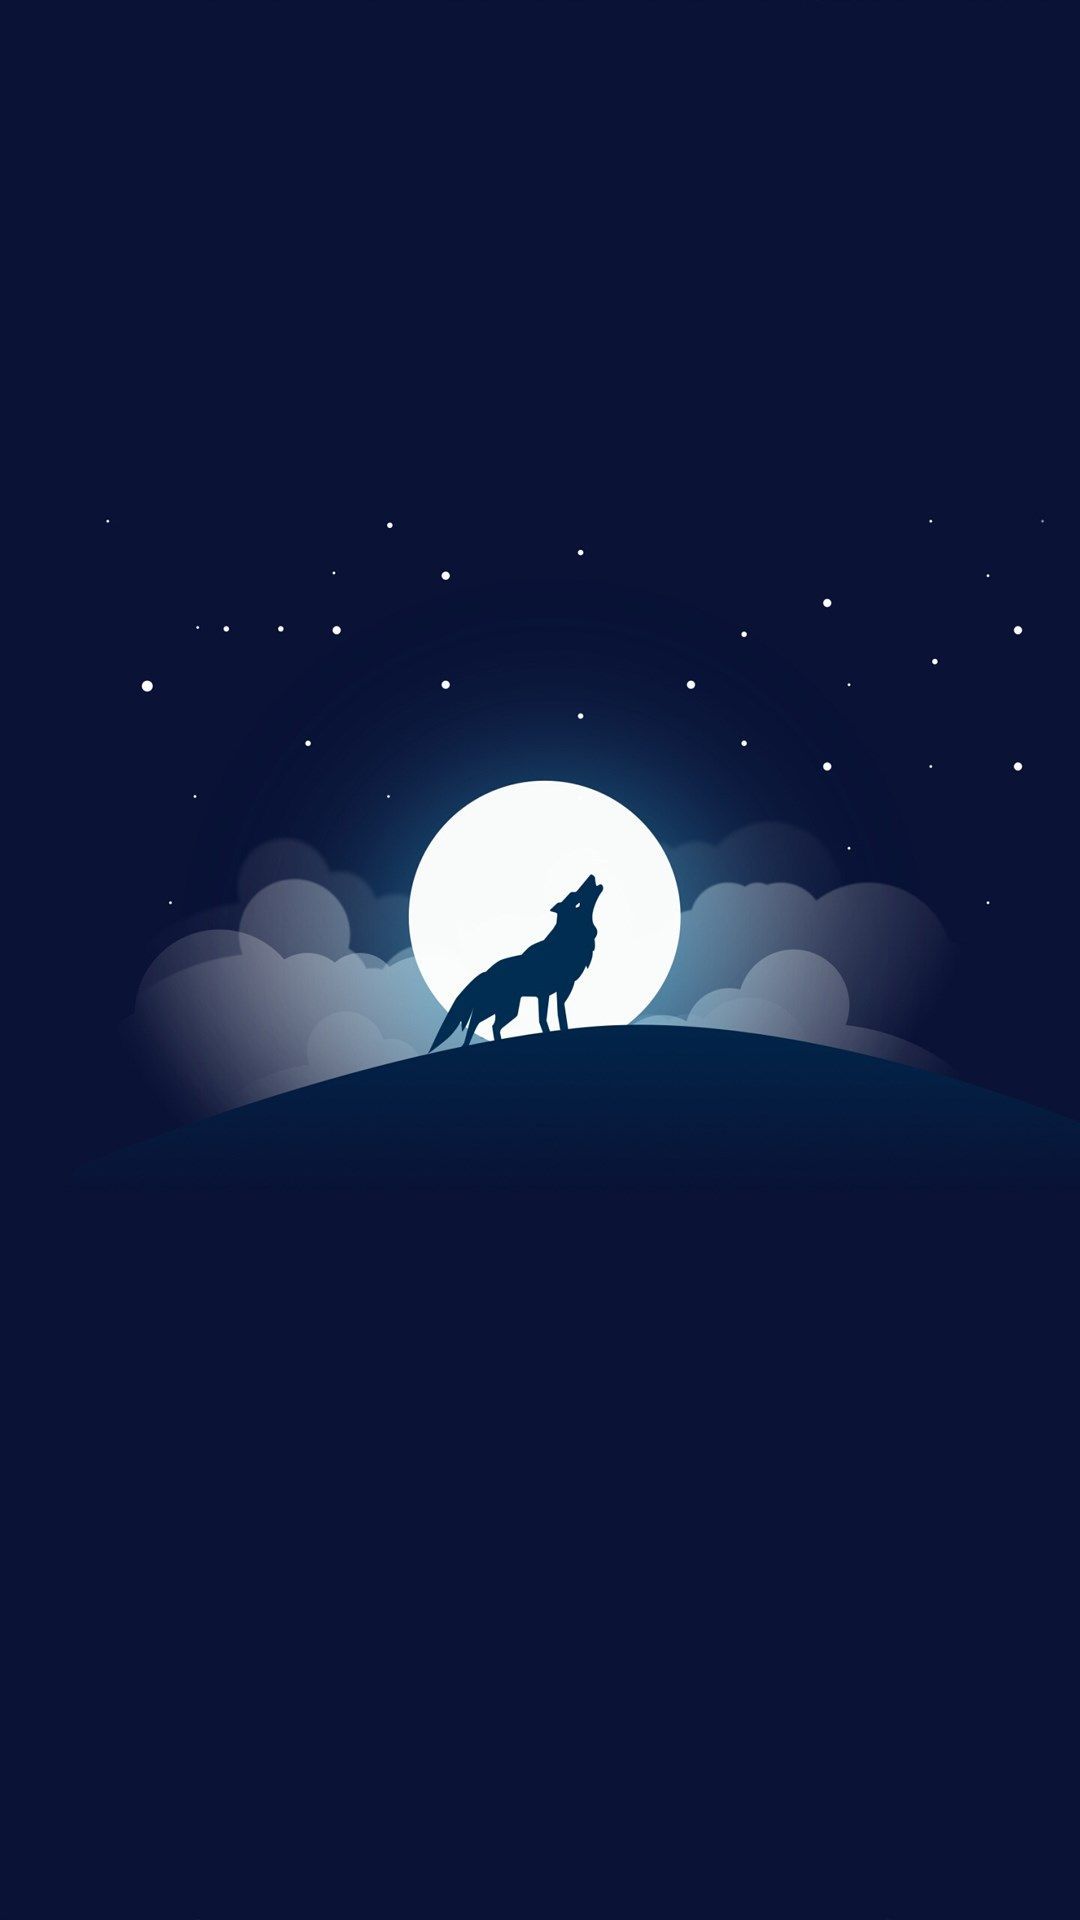 flyme os 3 wallpaper Wallppapers Gallery. Minimalist wallpaper, Android wallpaper, Wolf wallpaper